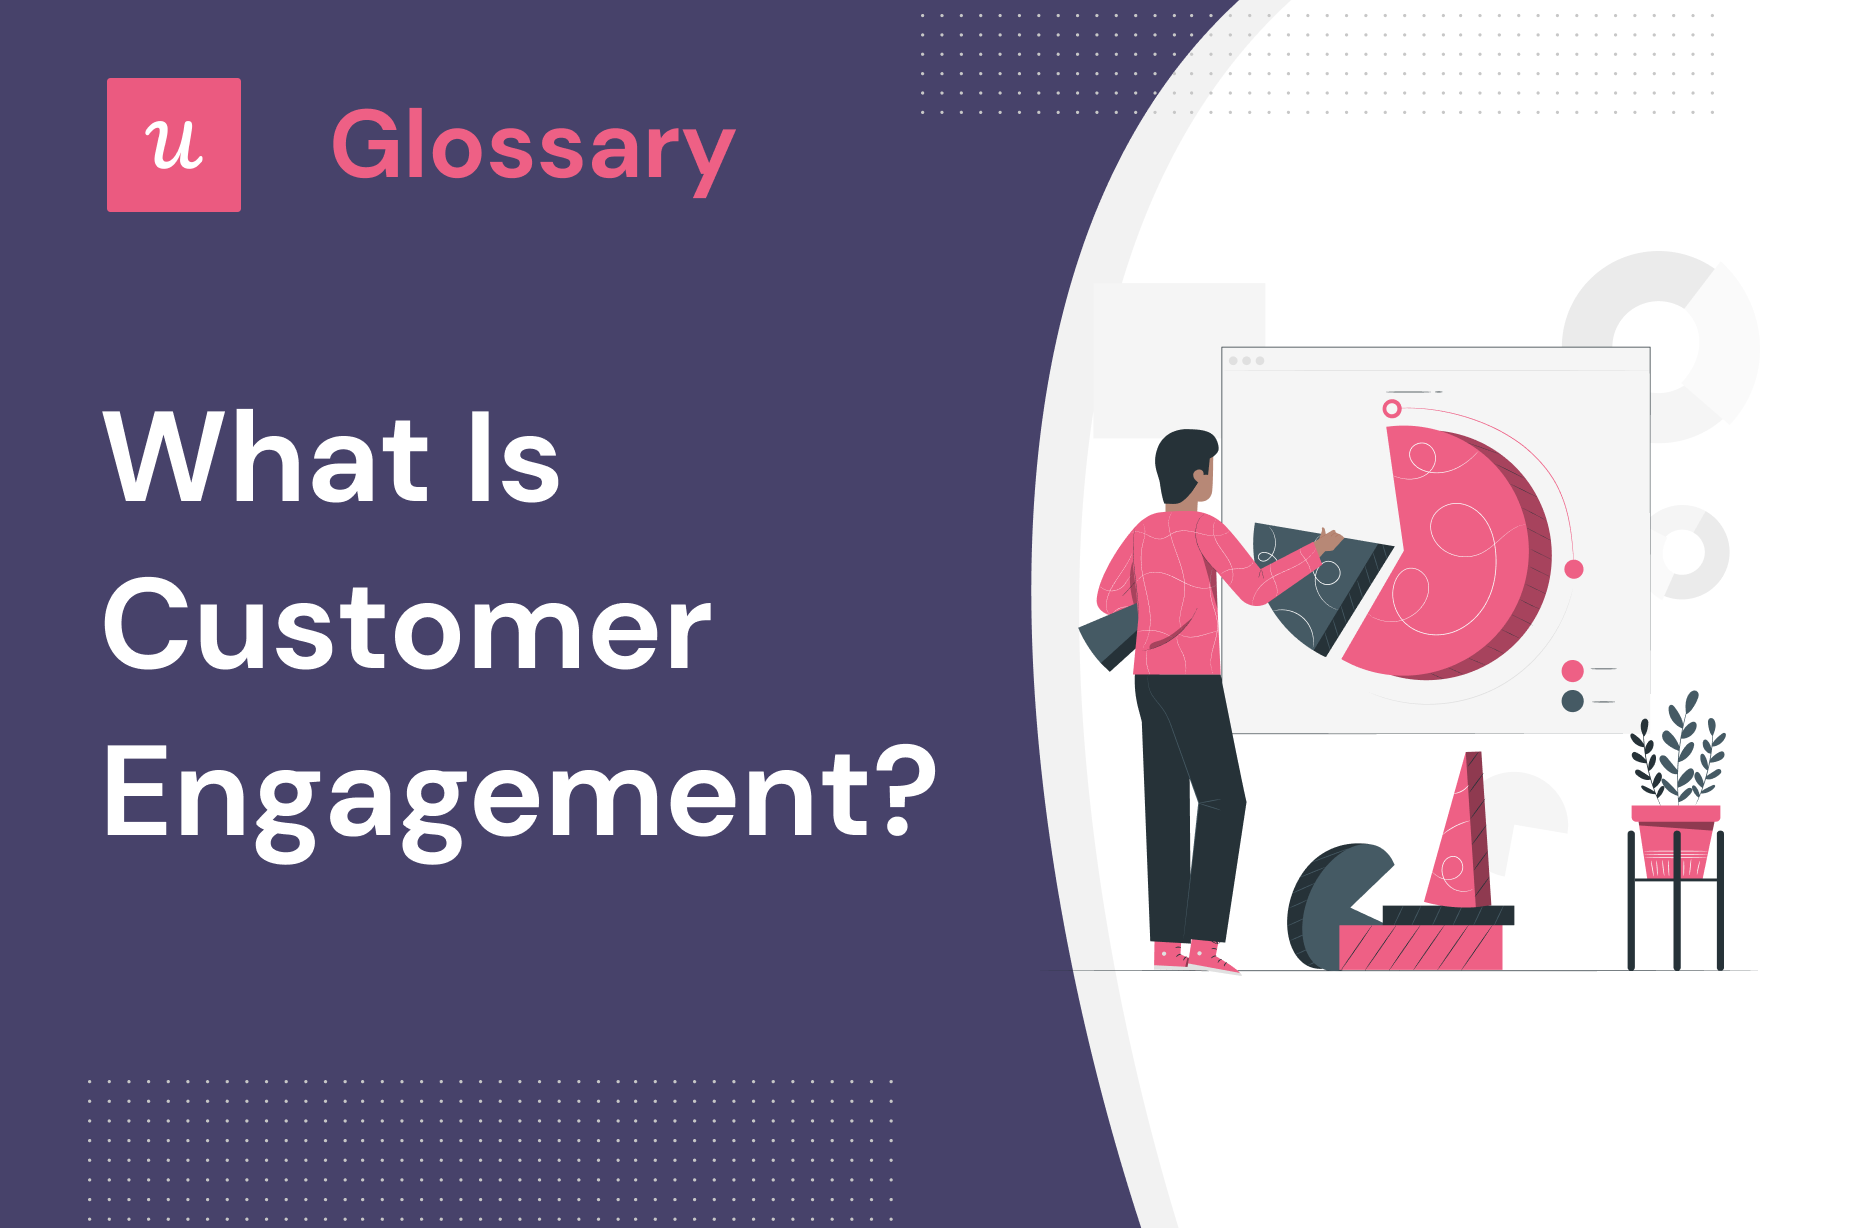 What is Customer Engagement?